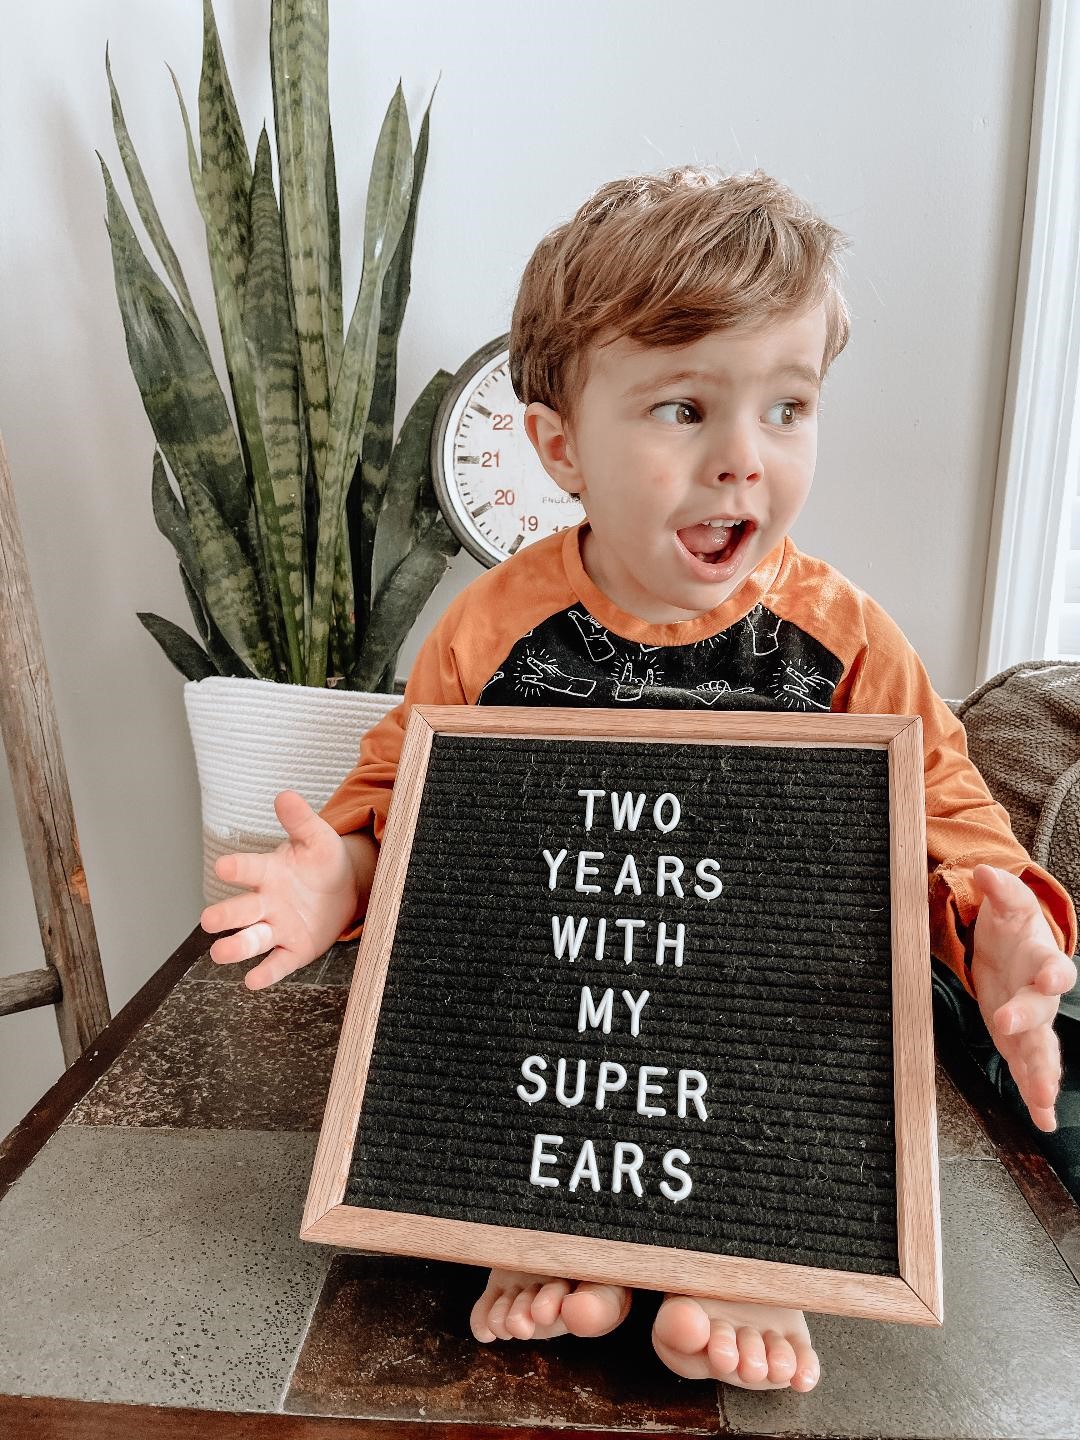 Child born with significant hearing loss with his cochlear implants